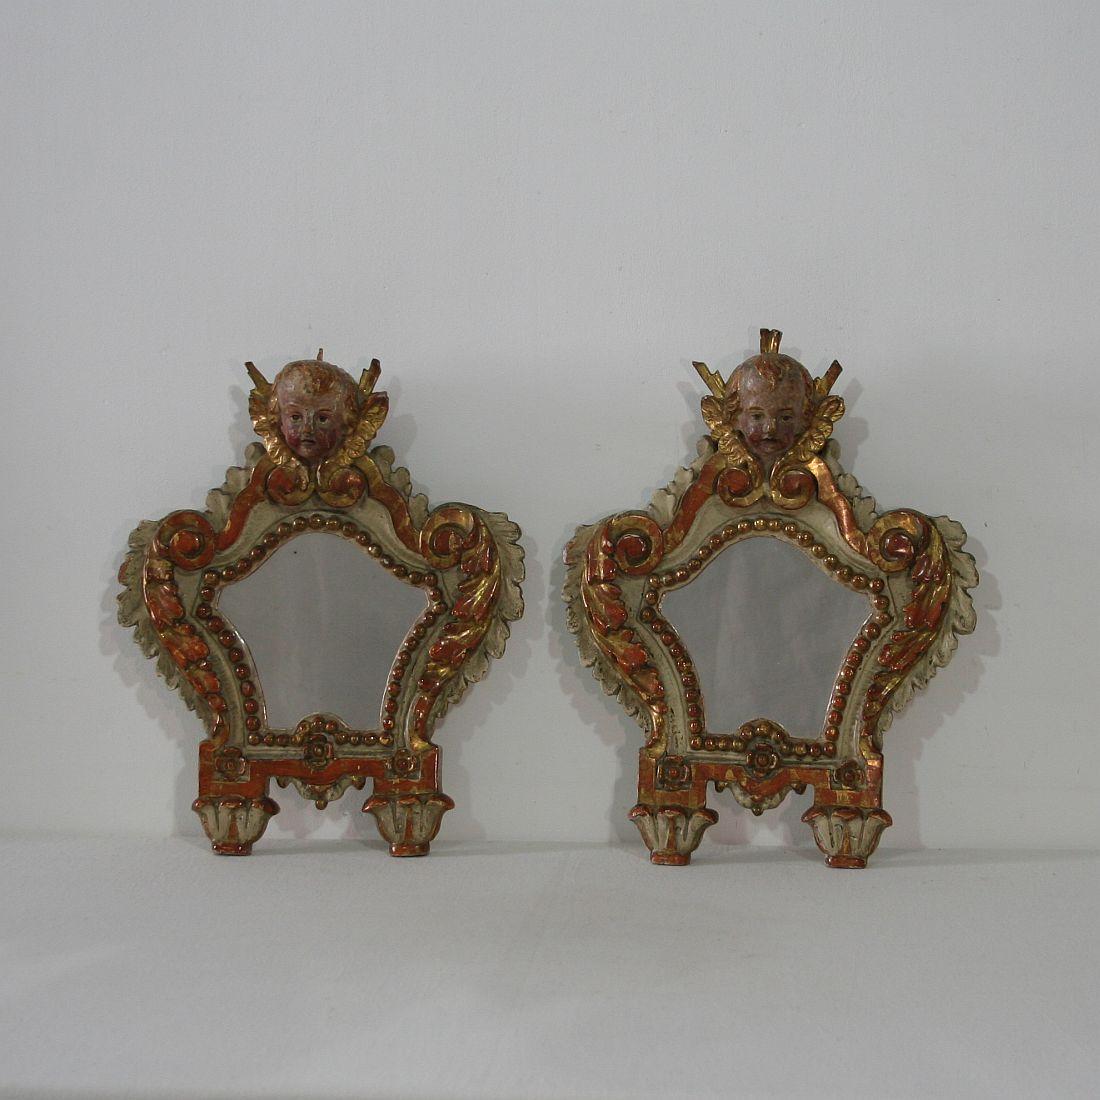 Unique pair of Baroque mirrors with angel heads, original color and gilding, Italy, 18th century. Weathered, small losses and old repairs.